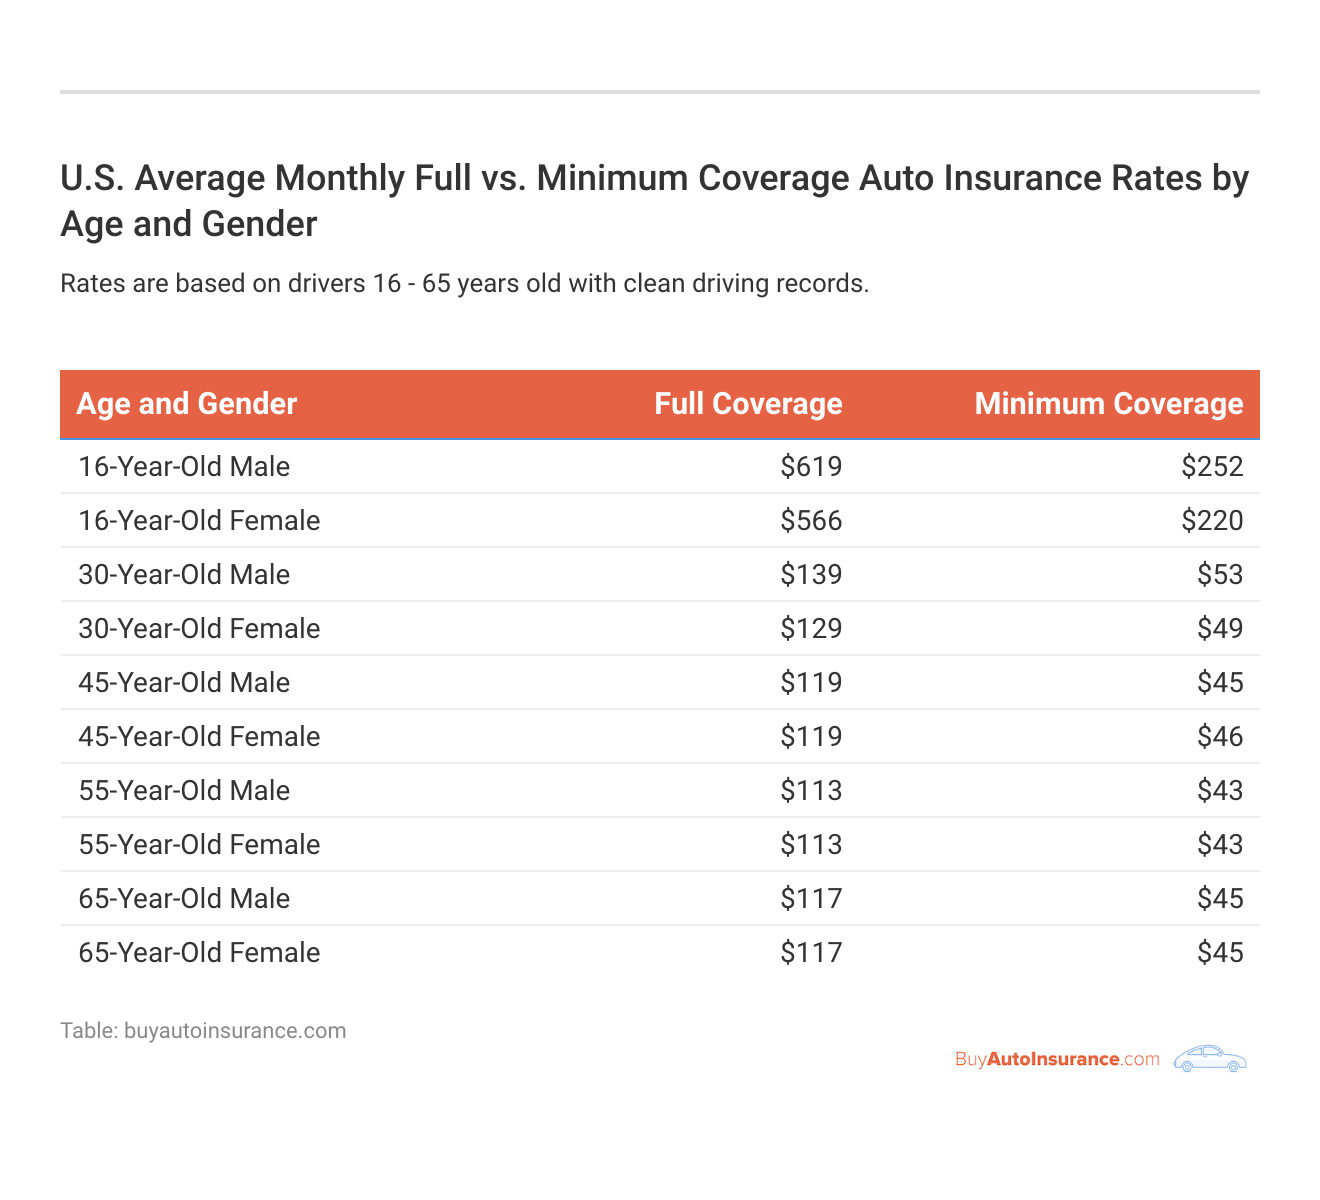 <h3>U.S. Average Monthly Full vs. Minimum Coverage Auto Insurance Rates by Age and Gender</h3>